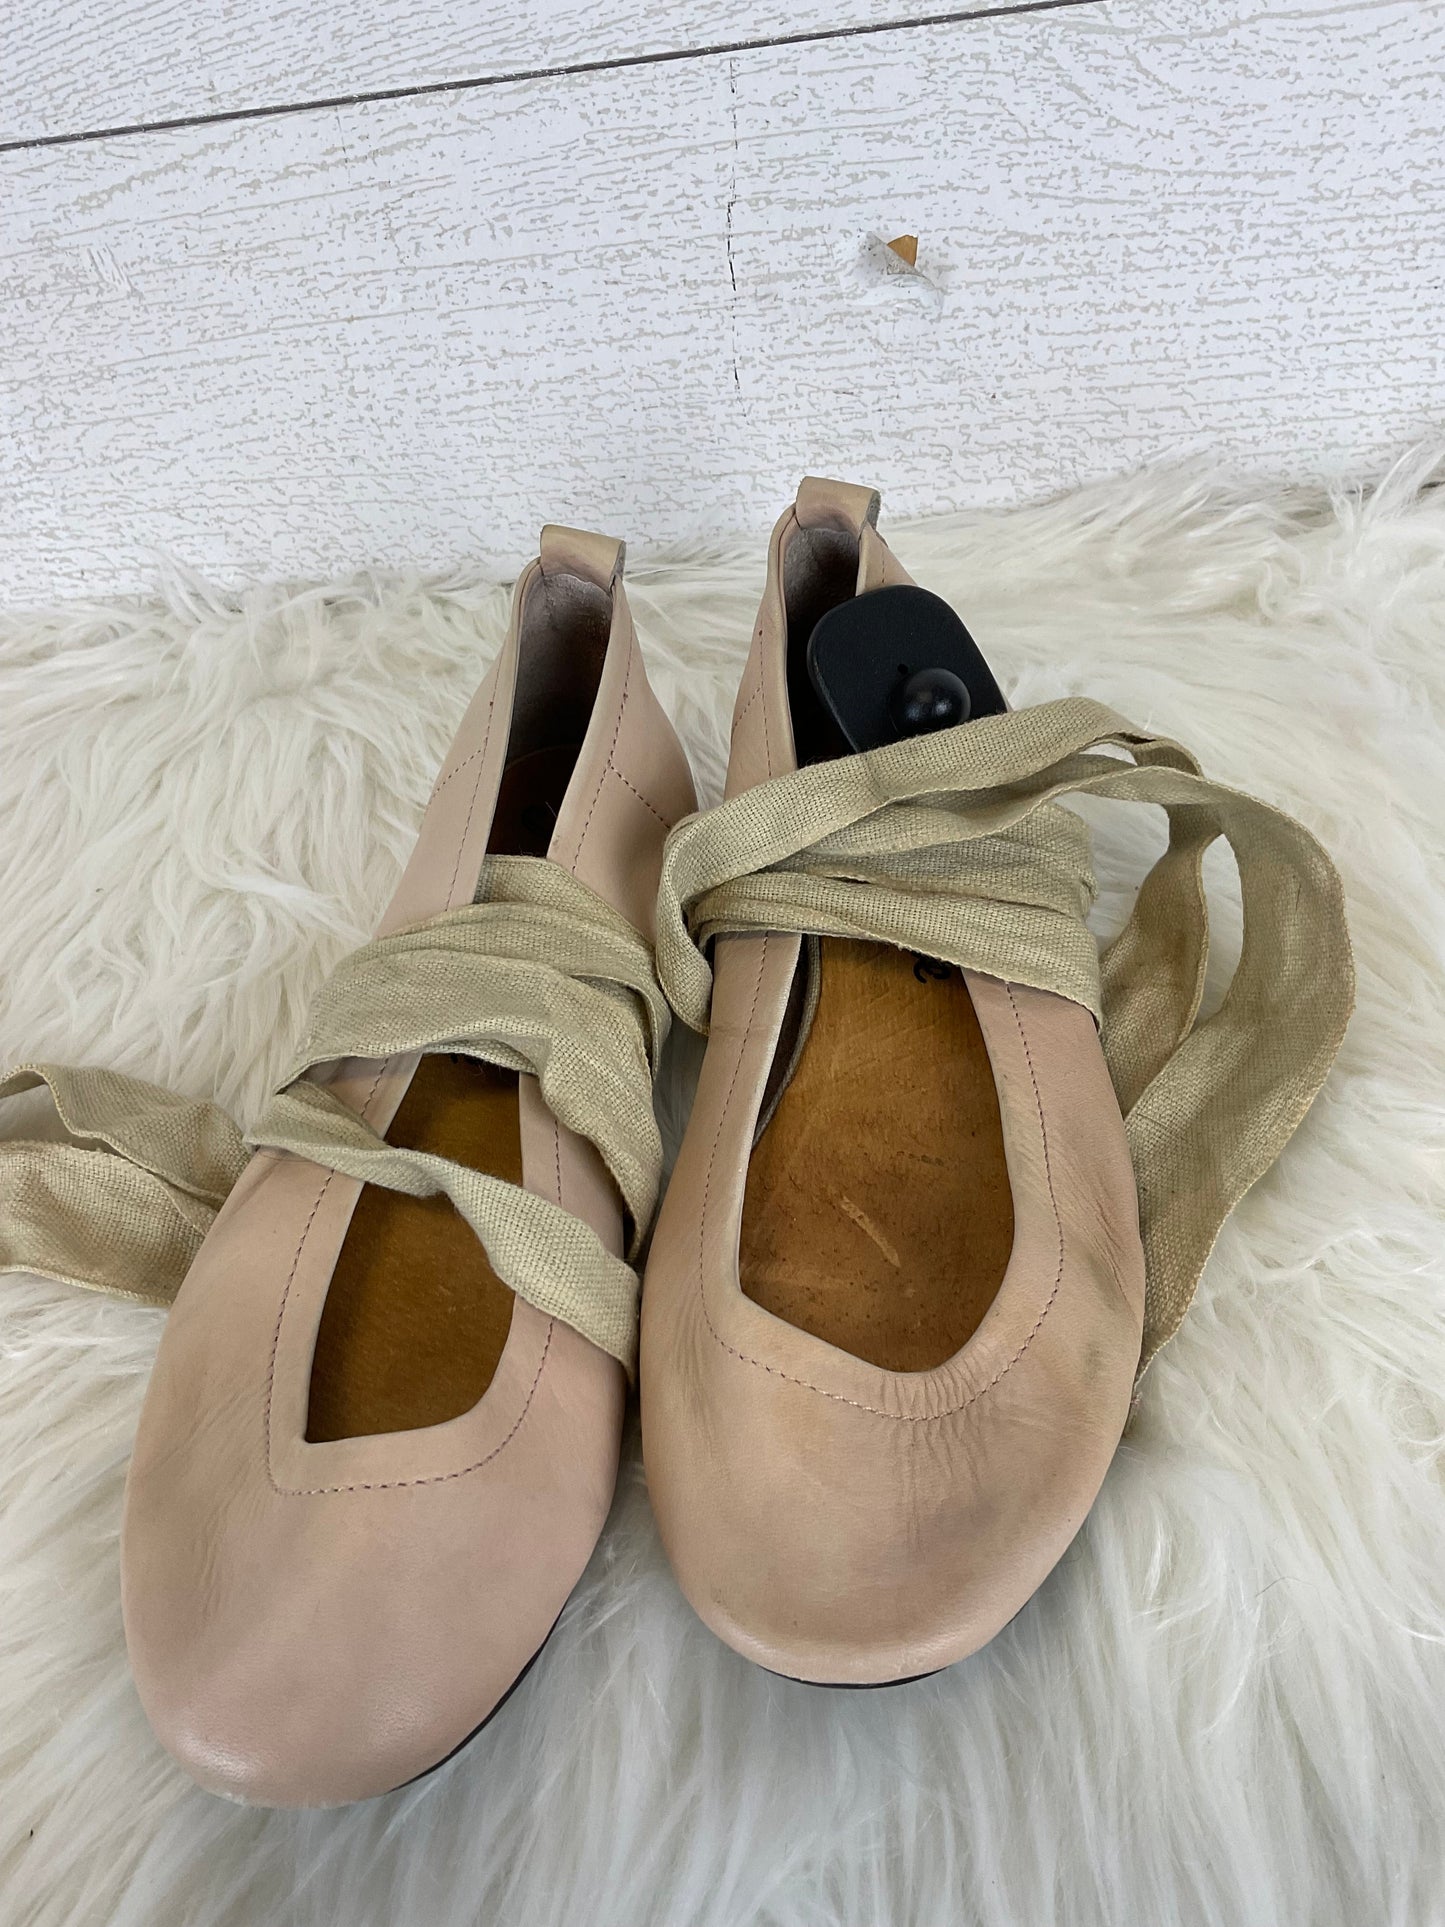 Tan Shoes Flats Free People, Size 7